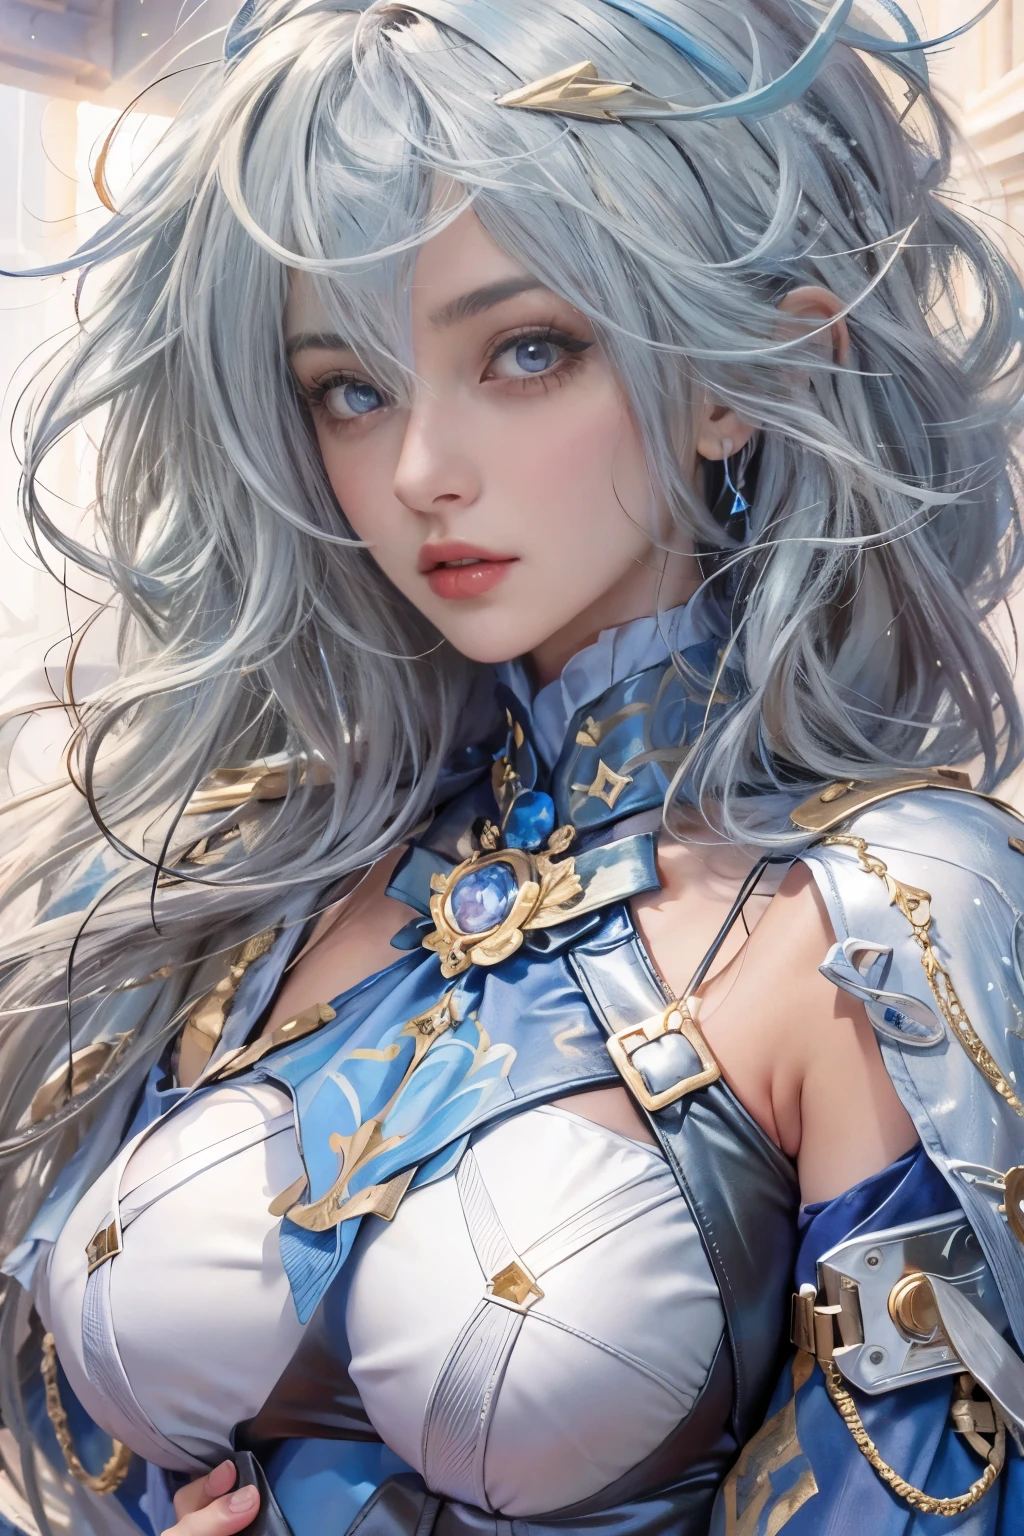 A dynamic series of paintings depicting a silver-haired, blue-eyed warrior girl., 8k, 超High resolution, Super detailed, High resolution,(Well designed face), Great face, (Very detailed), Beautiful Eyes, Soft lighting,, Outdoor, street,, URUSHISATO,1980s,, Beautiful fine details,Machinery Parts, Asymmetrical Hair,Thigh-high socks, Latex suit,Cleavage, huge firm bouncing bust, dynamic sexy poses